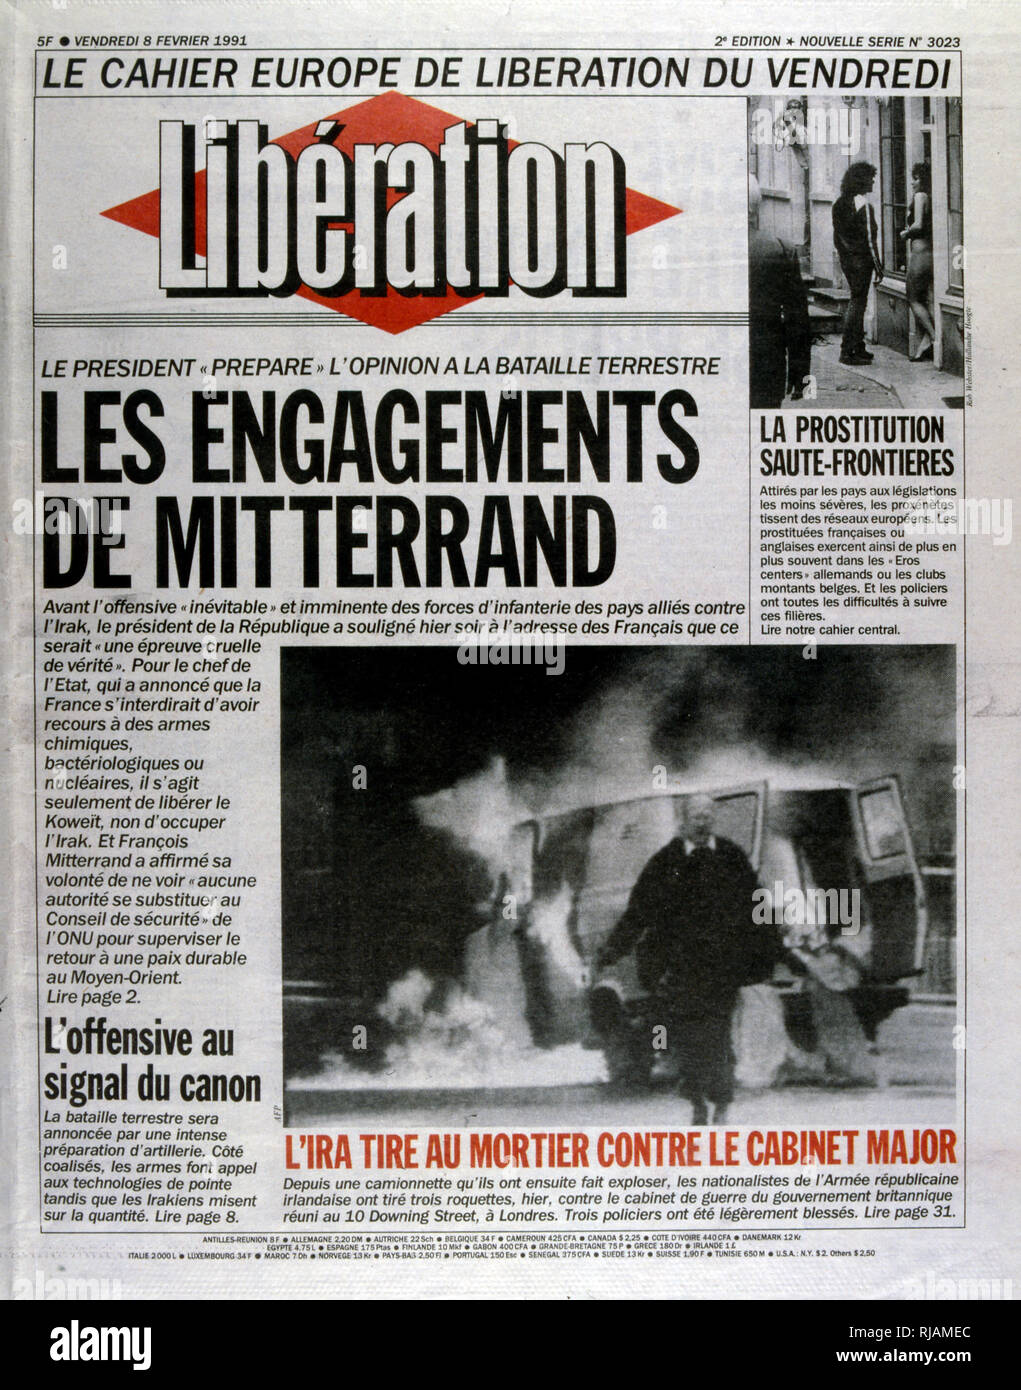 President Mitterrand outlines his position on the Gulf War 1991 Front page of the French newspaper 'Liberation' 6th February 1991. The Gulf War (2 August 1990 - 28 February 1991), codenamed Operation Desert Shield and Operation Desert Storm, was a war waged by coalition forces from 35 nations led by the United States against Iraq in response to Iraq's invasion and annexation of Kuwait. Stock Photo